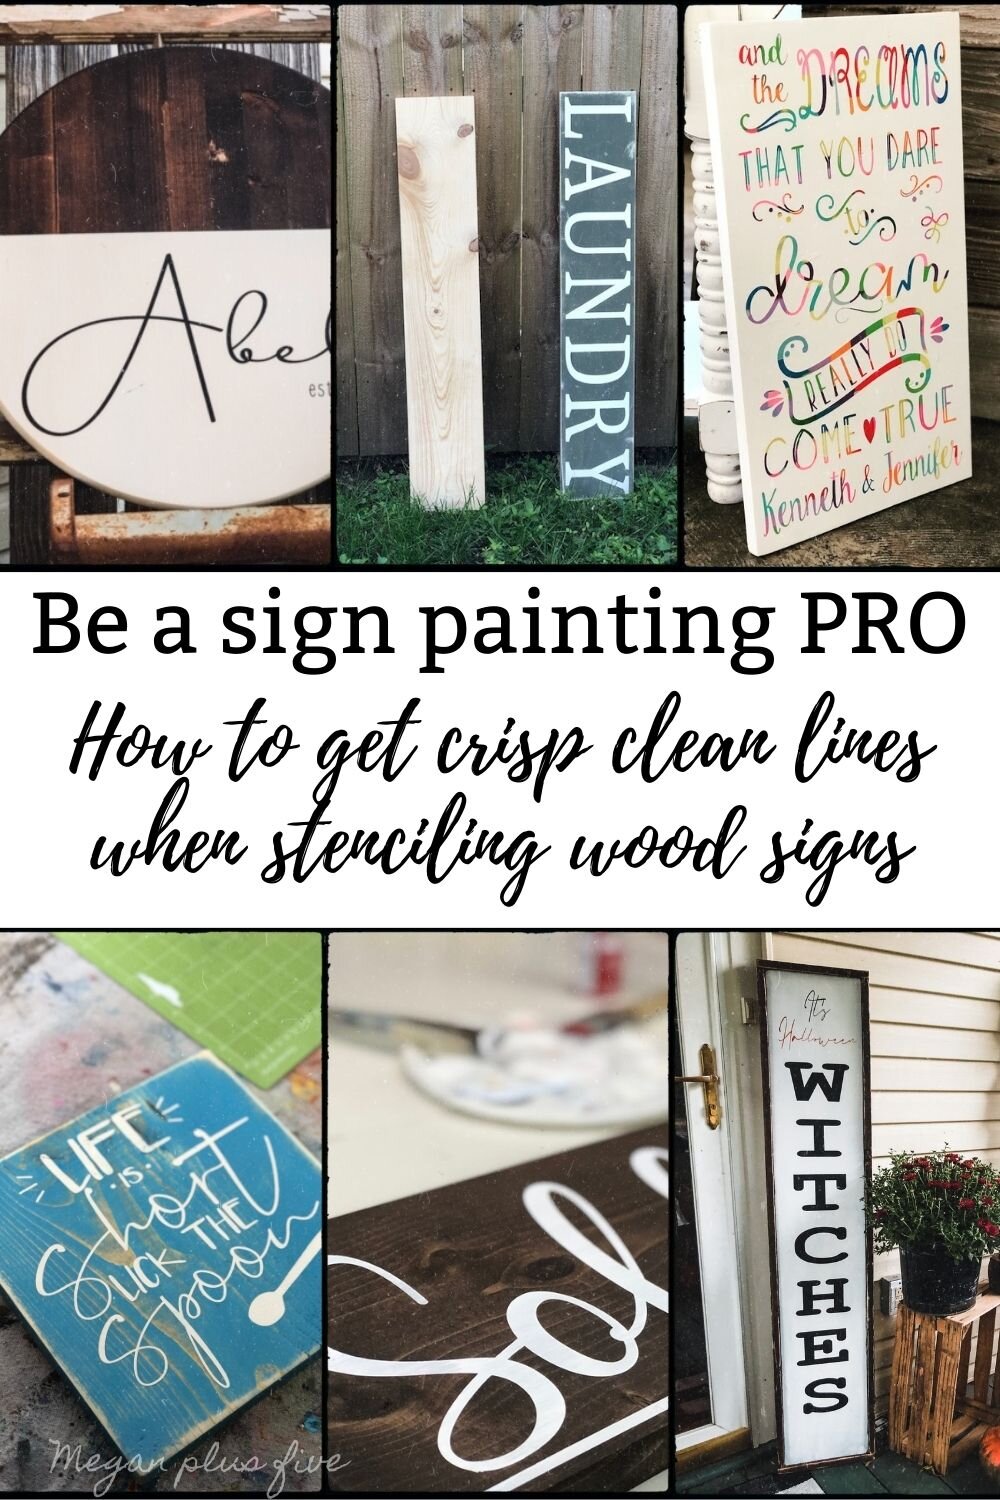 DIY painted wood sign using your Cricut. How to get crisp lines when stenciling using stencil film.